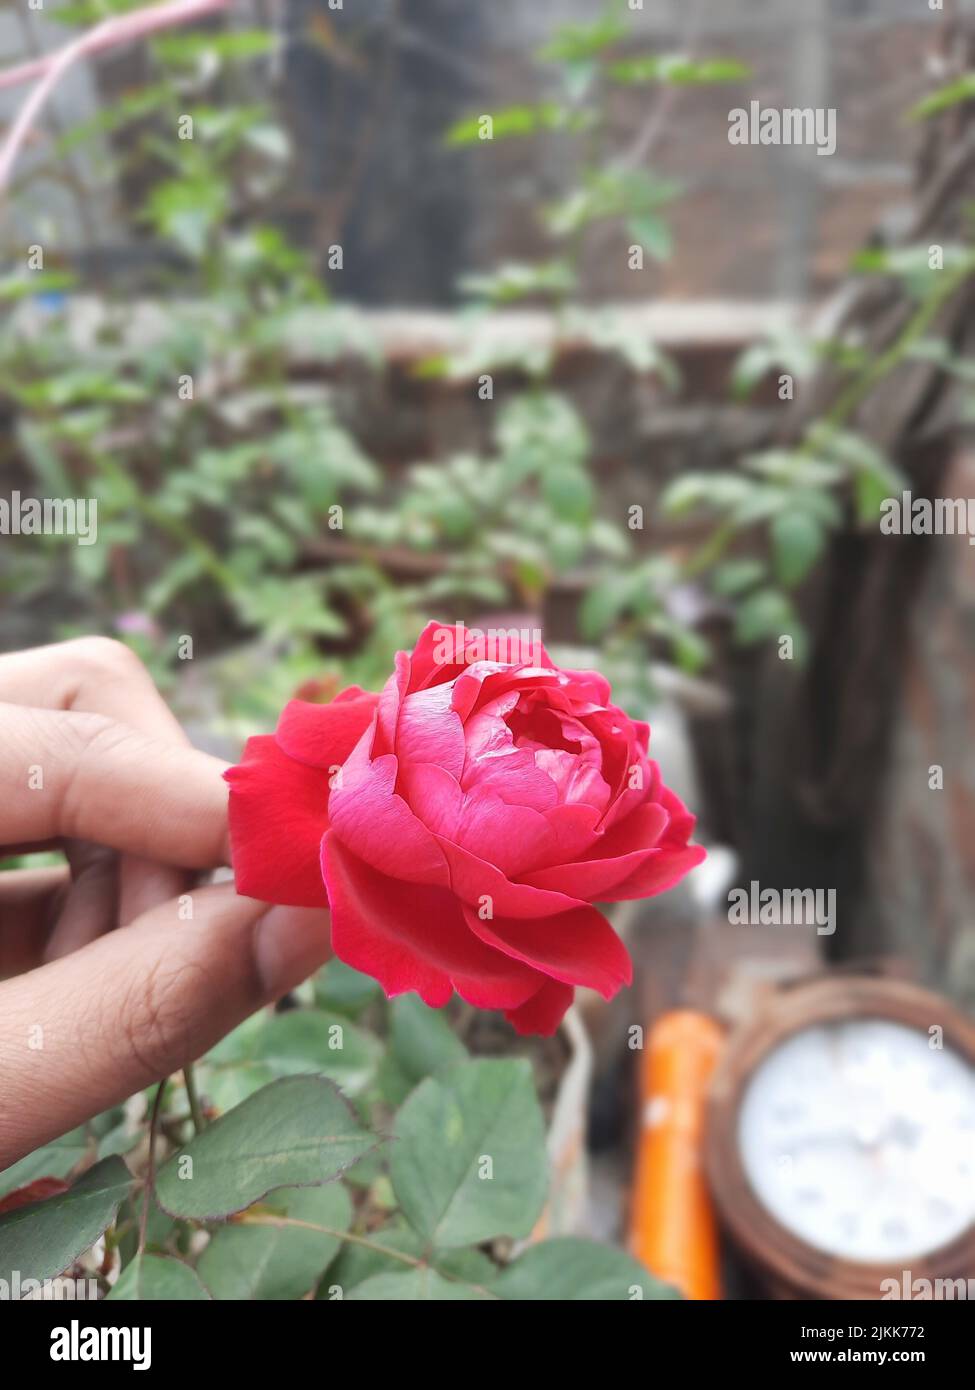 A vertical shot of a person picking a blooming red rose from a garden Stock Photo